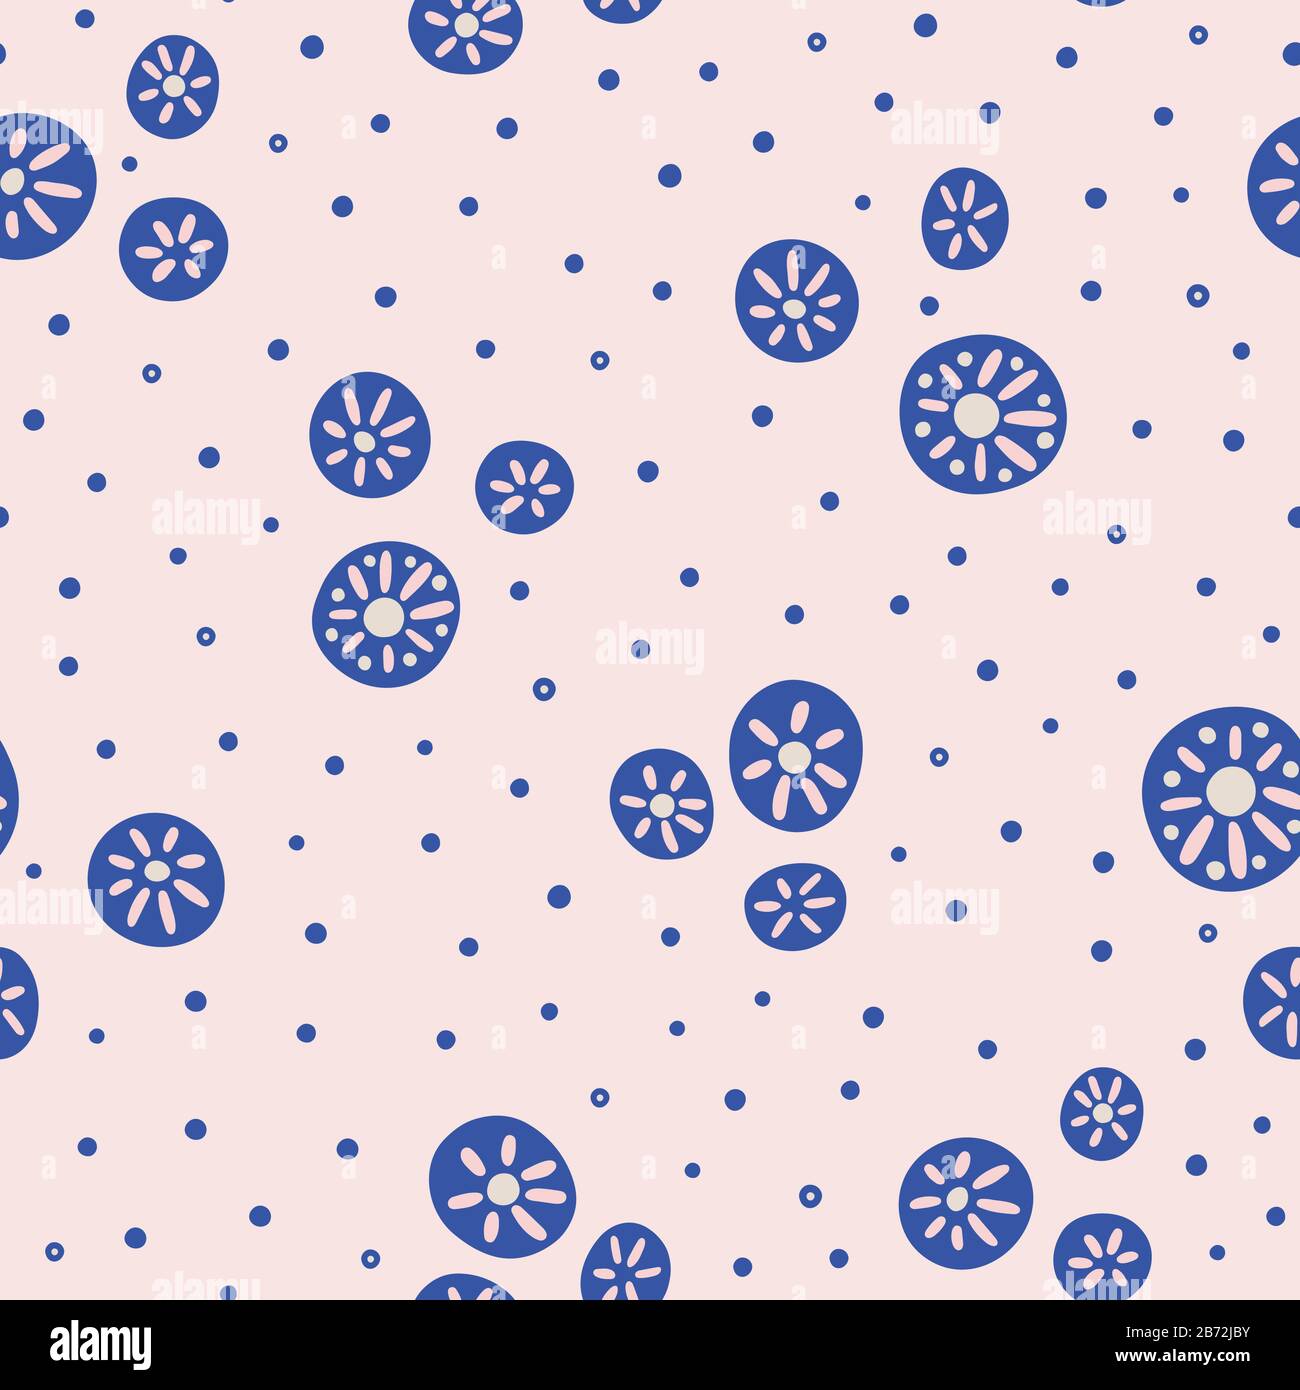 Abstract vector pattern of decorated circles and dots in pink and navy blue. Pretty seamless repeat design background. Stock Vector